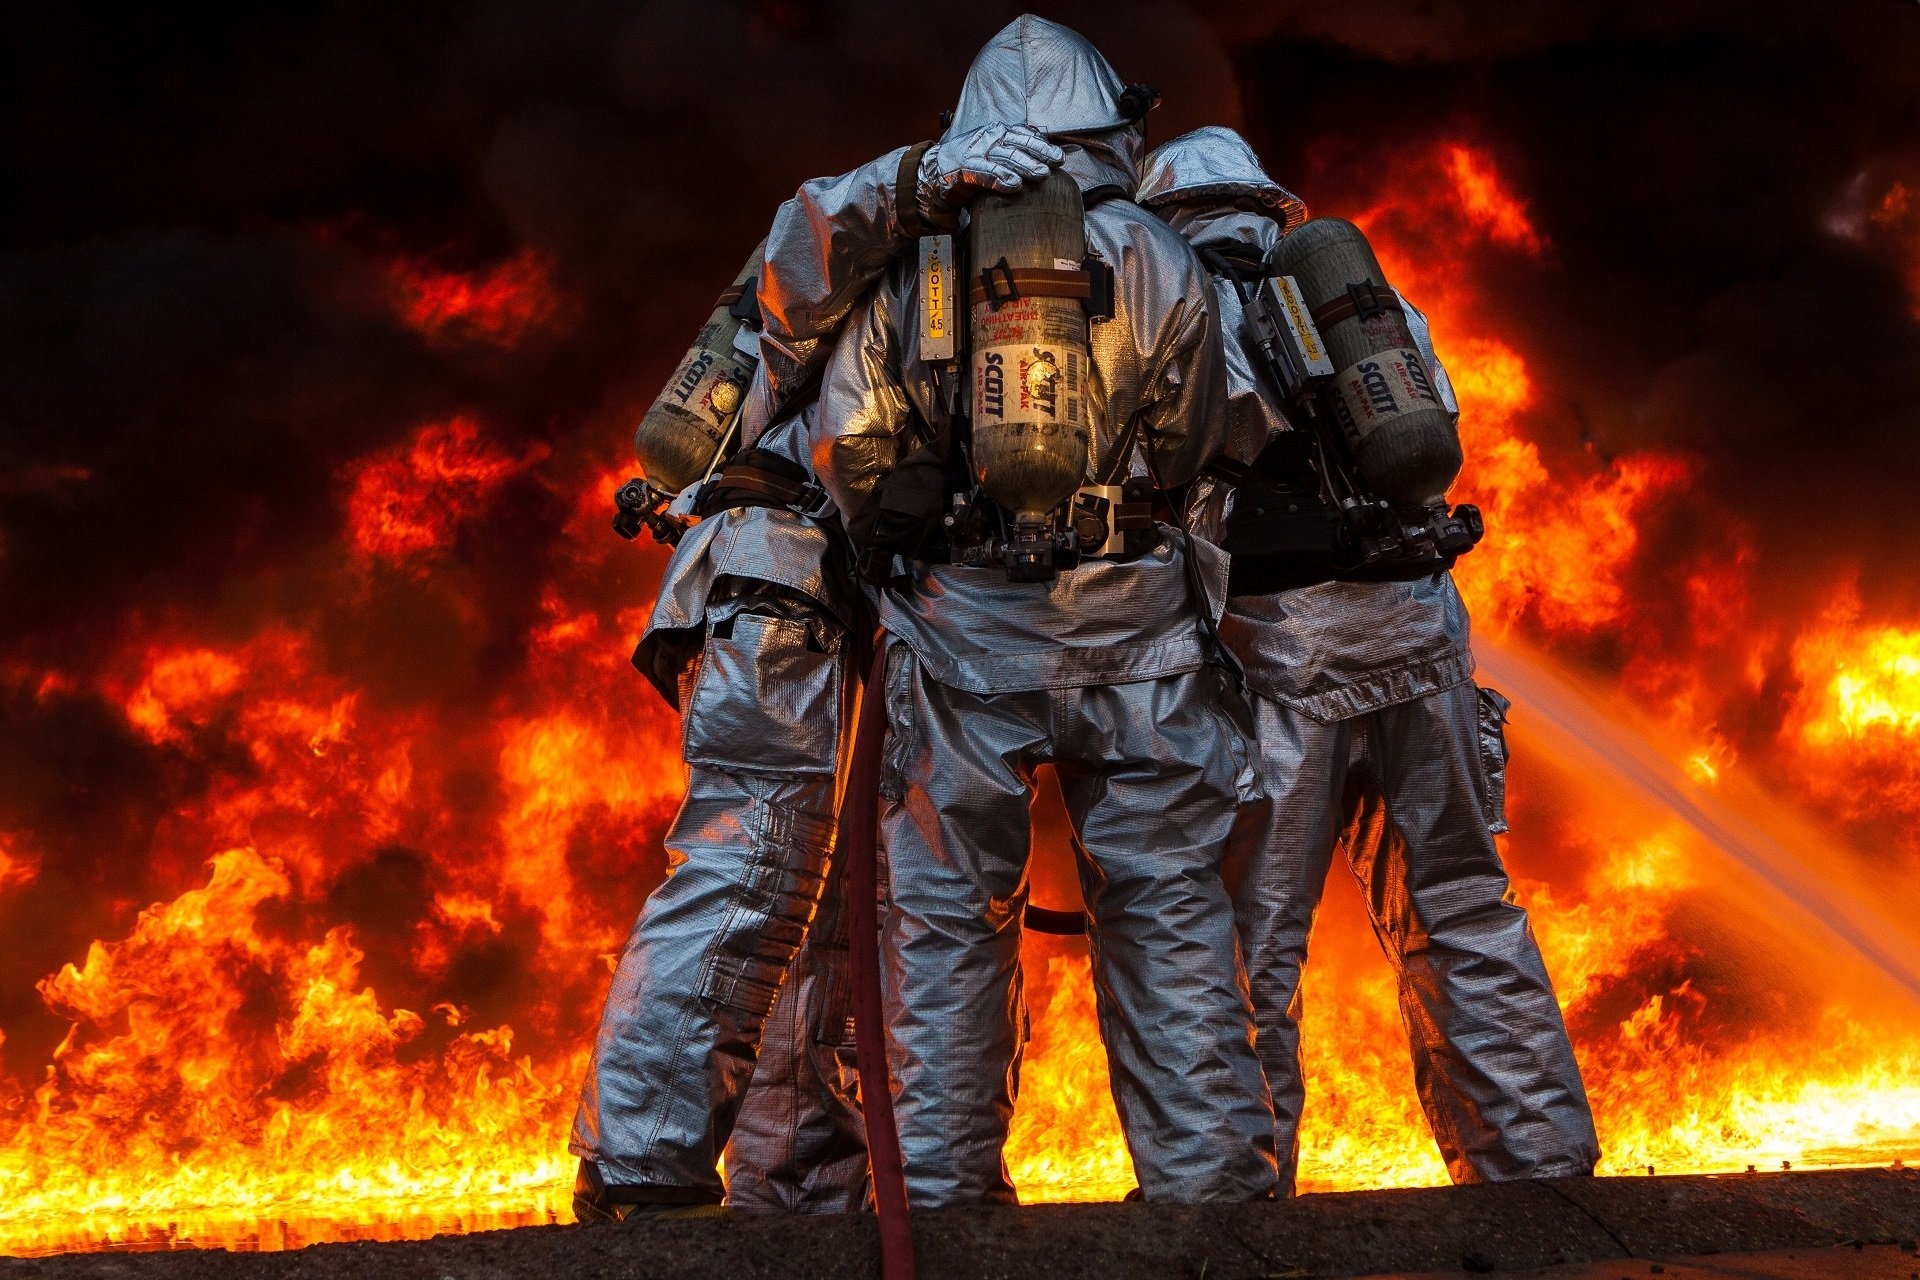 Fireman: Firefighter, Personal protective equipment, Emergency situation. 1920x1280 HD Wallpaper.